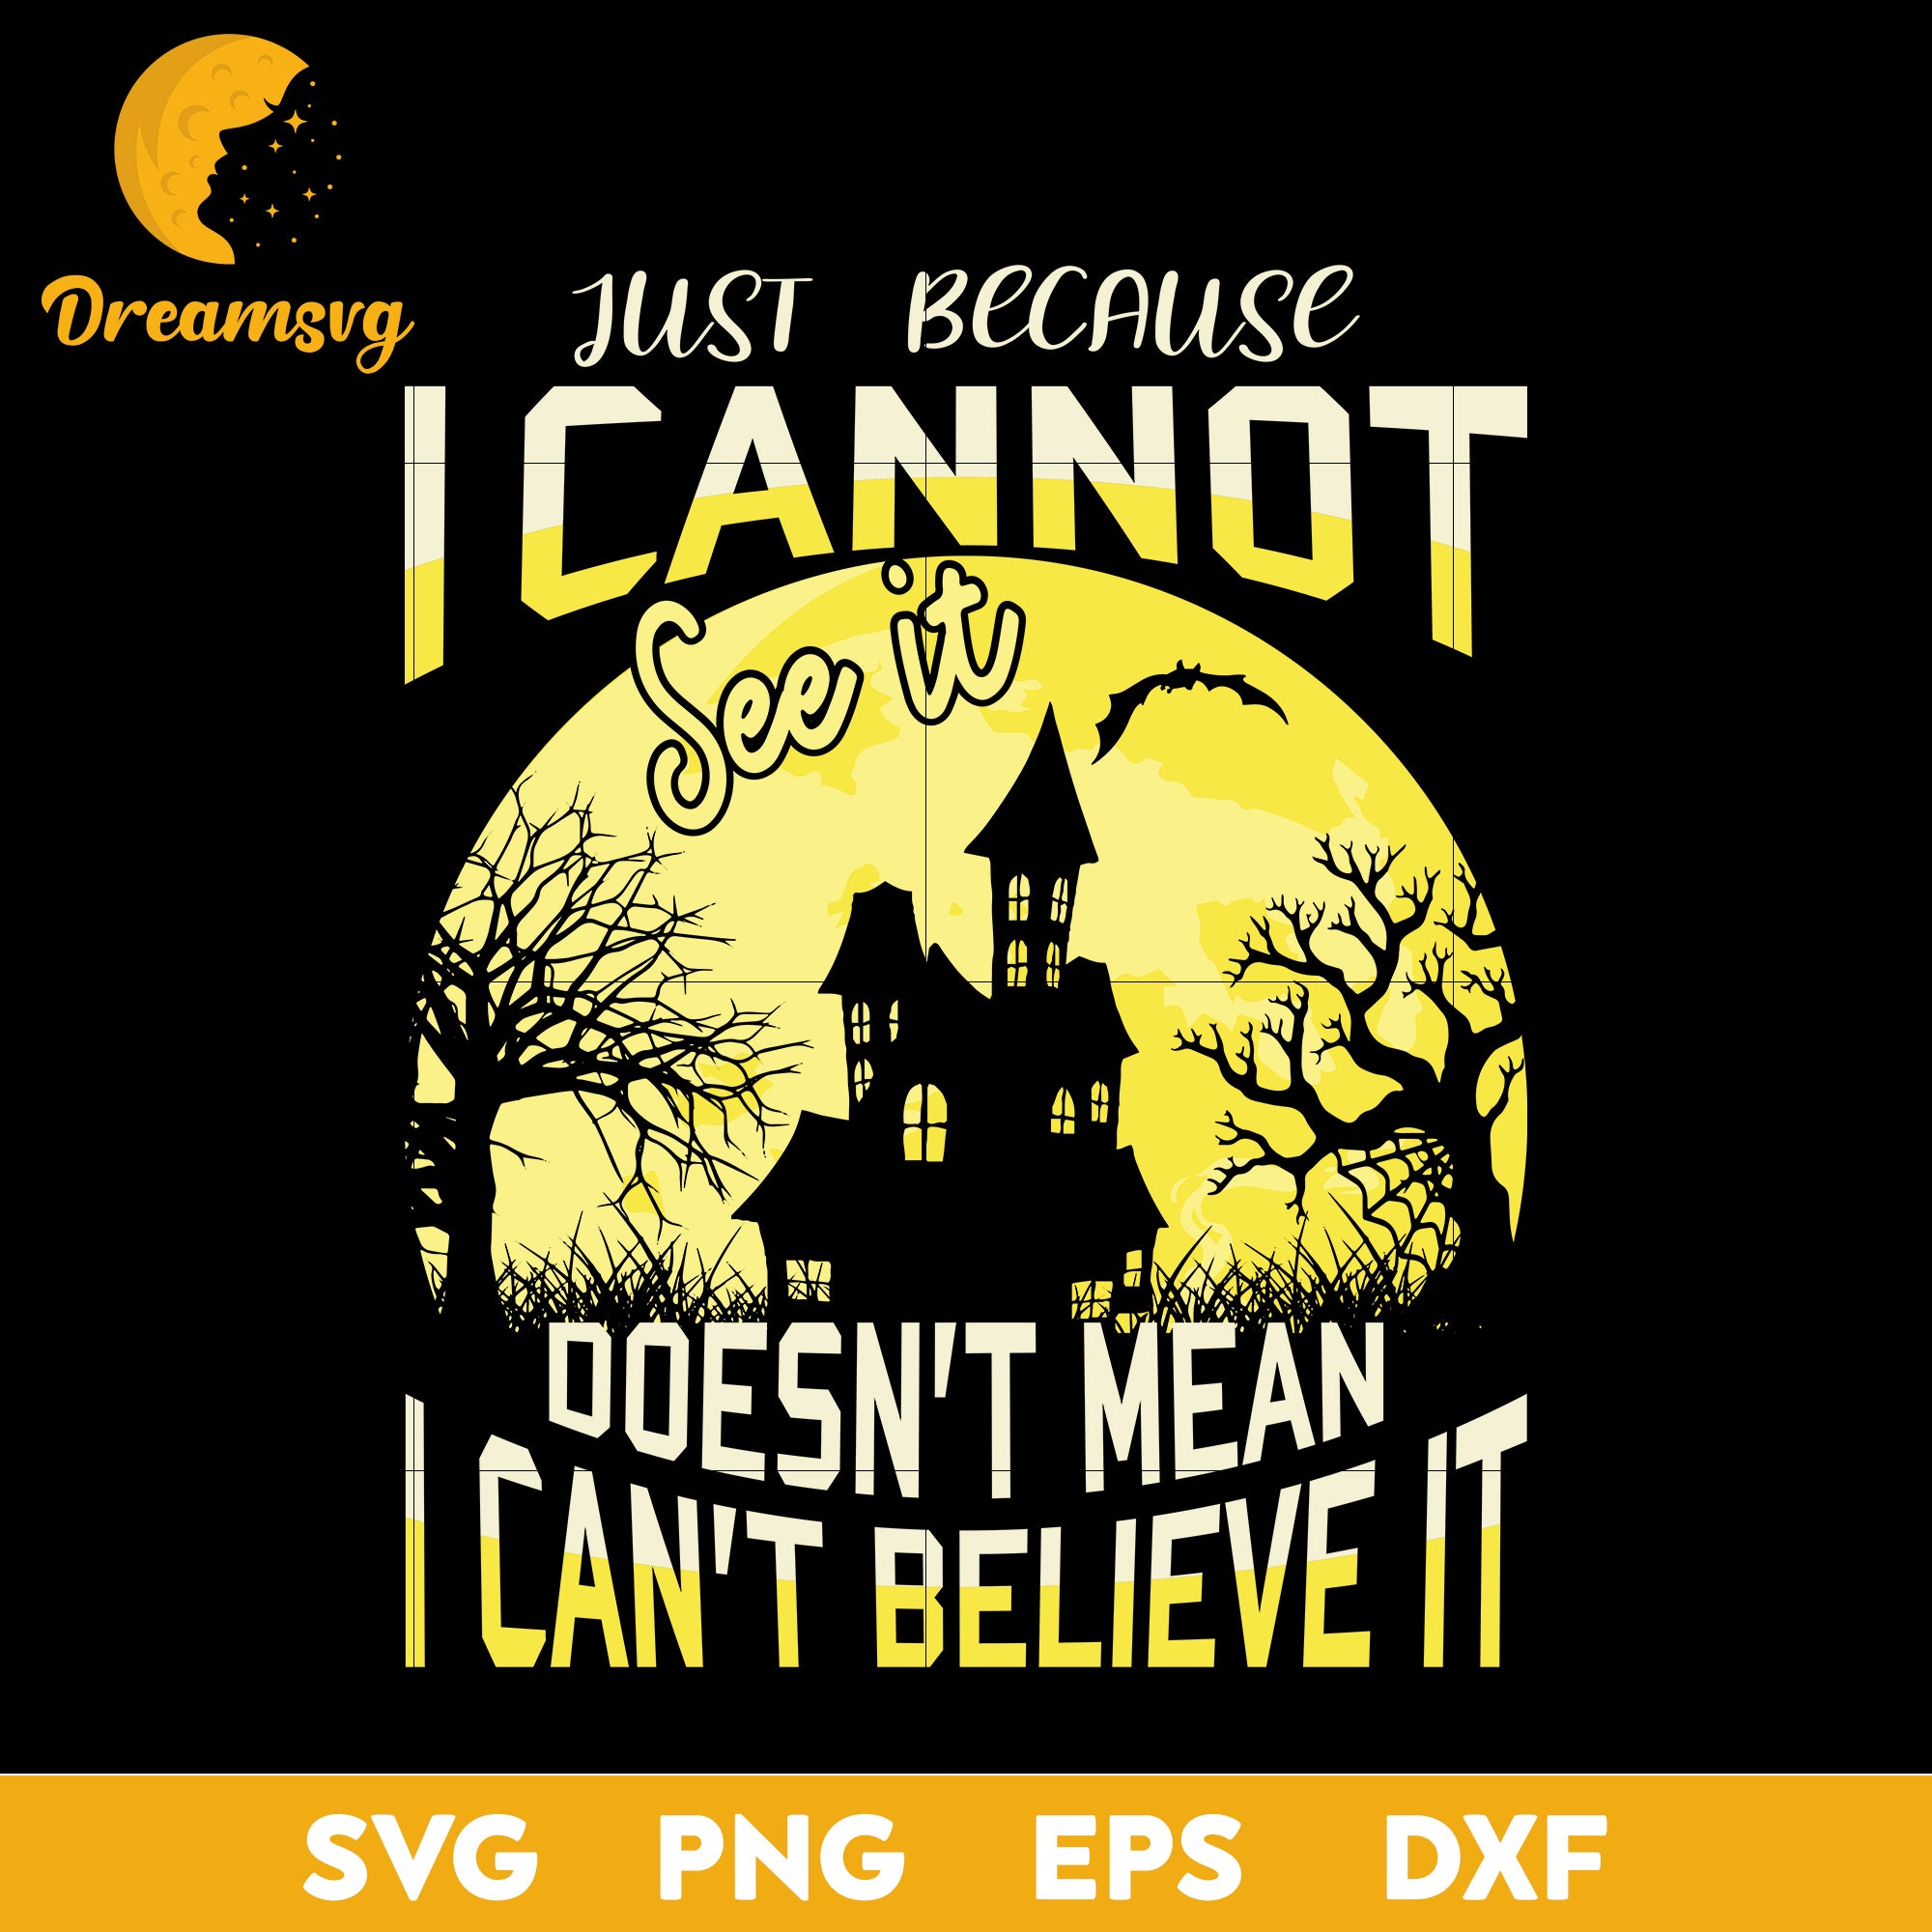 Just becaus i cannot see it doesn't mean i can't believe it svg, Halloween svg, png, dxf, eps digital file.